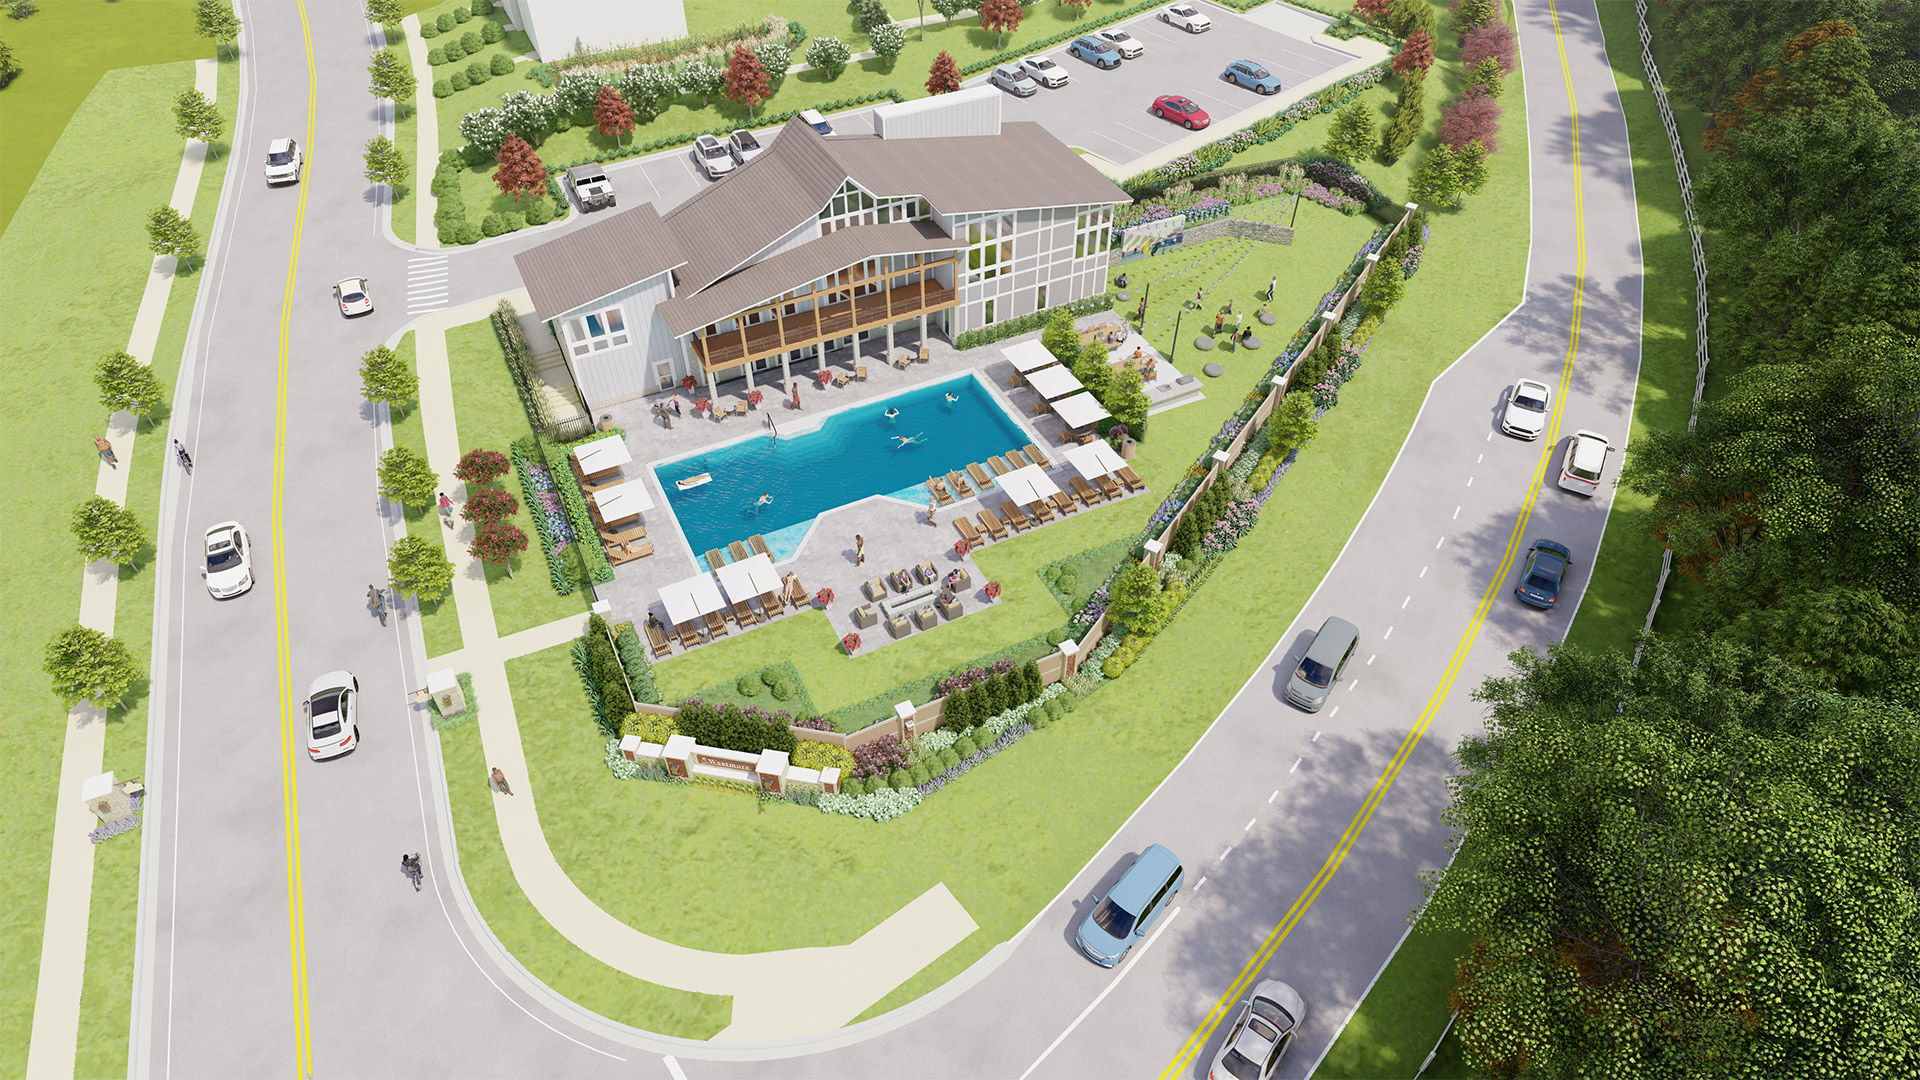 Enjoy time with friends and family at the future pool and clubhouse